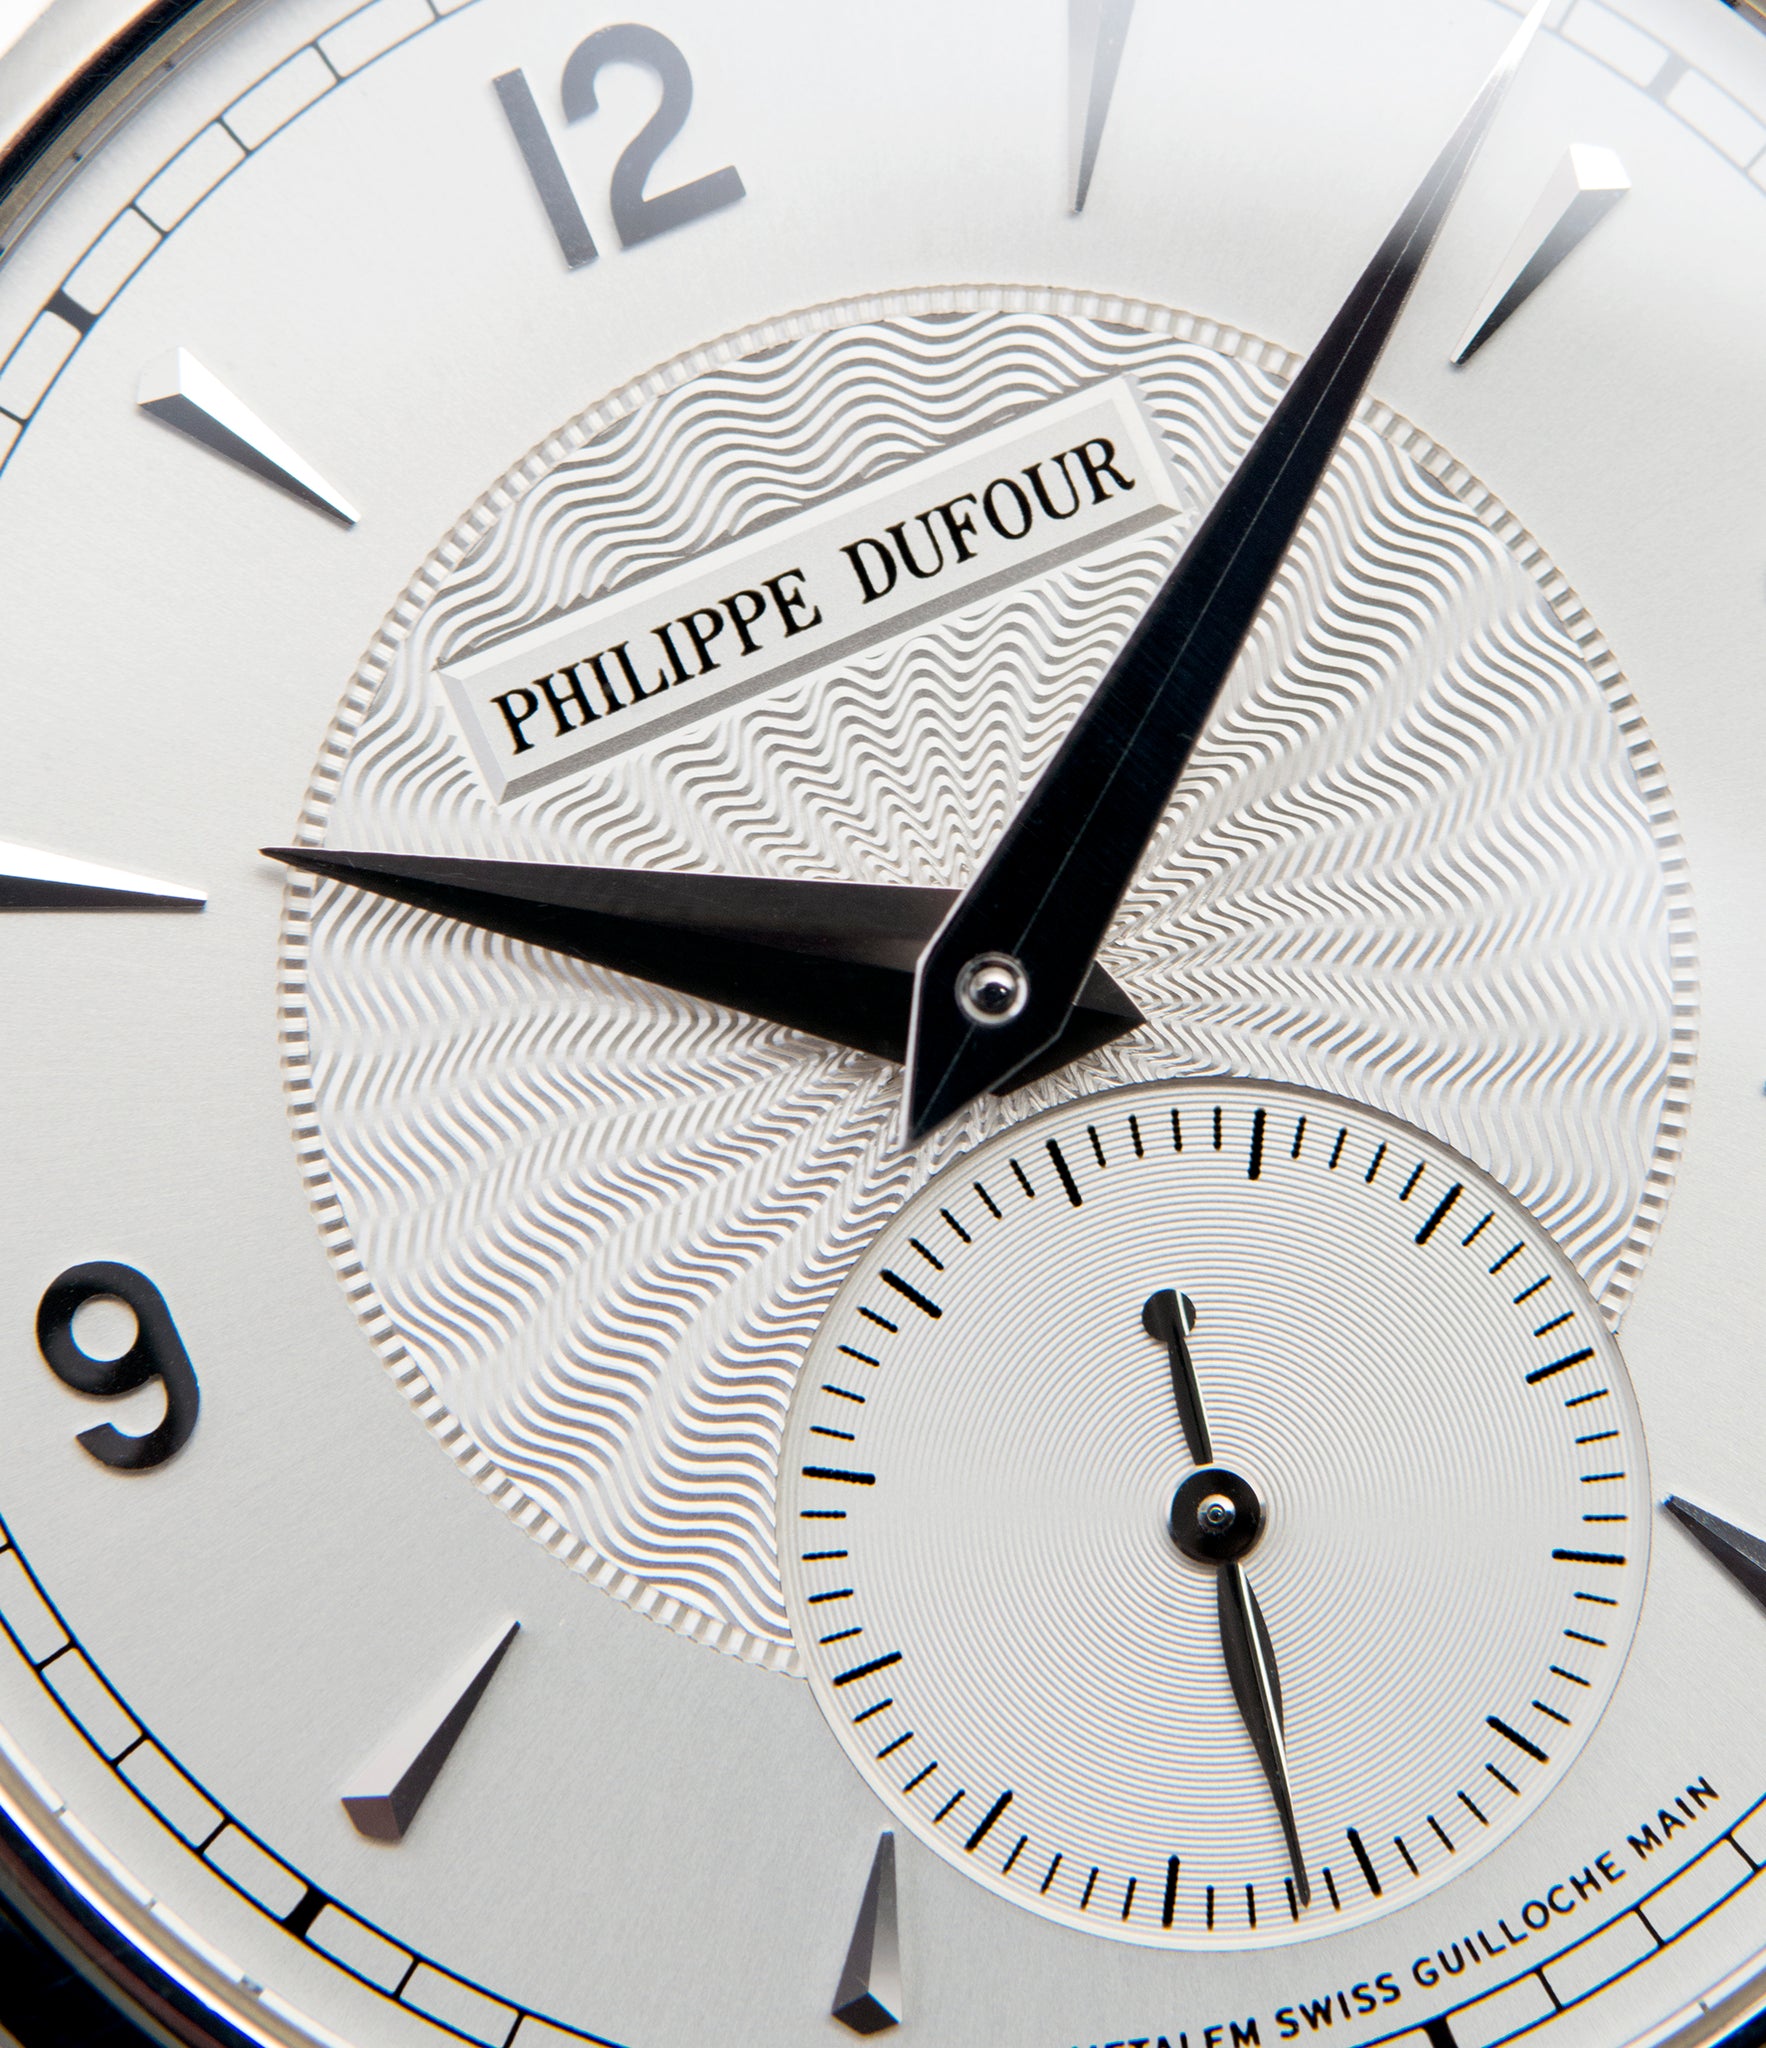 silver guilloche dial Philippe Dufour Simplicity platinum time-only dress watch for sale online at A Collected Man London UK approved specialist of preowned independent watchmakers